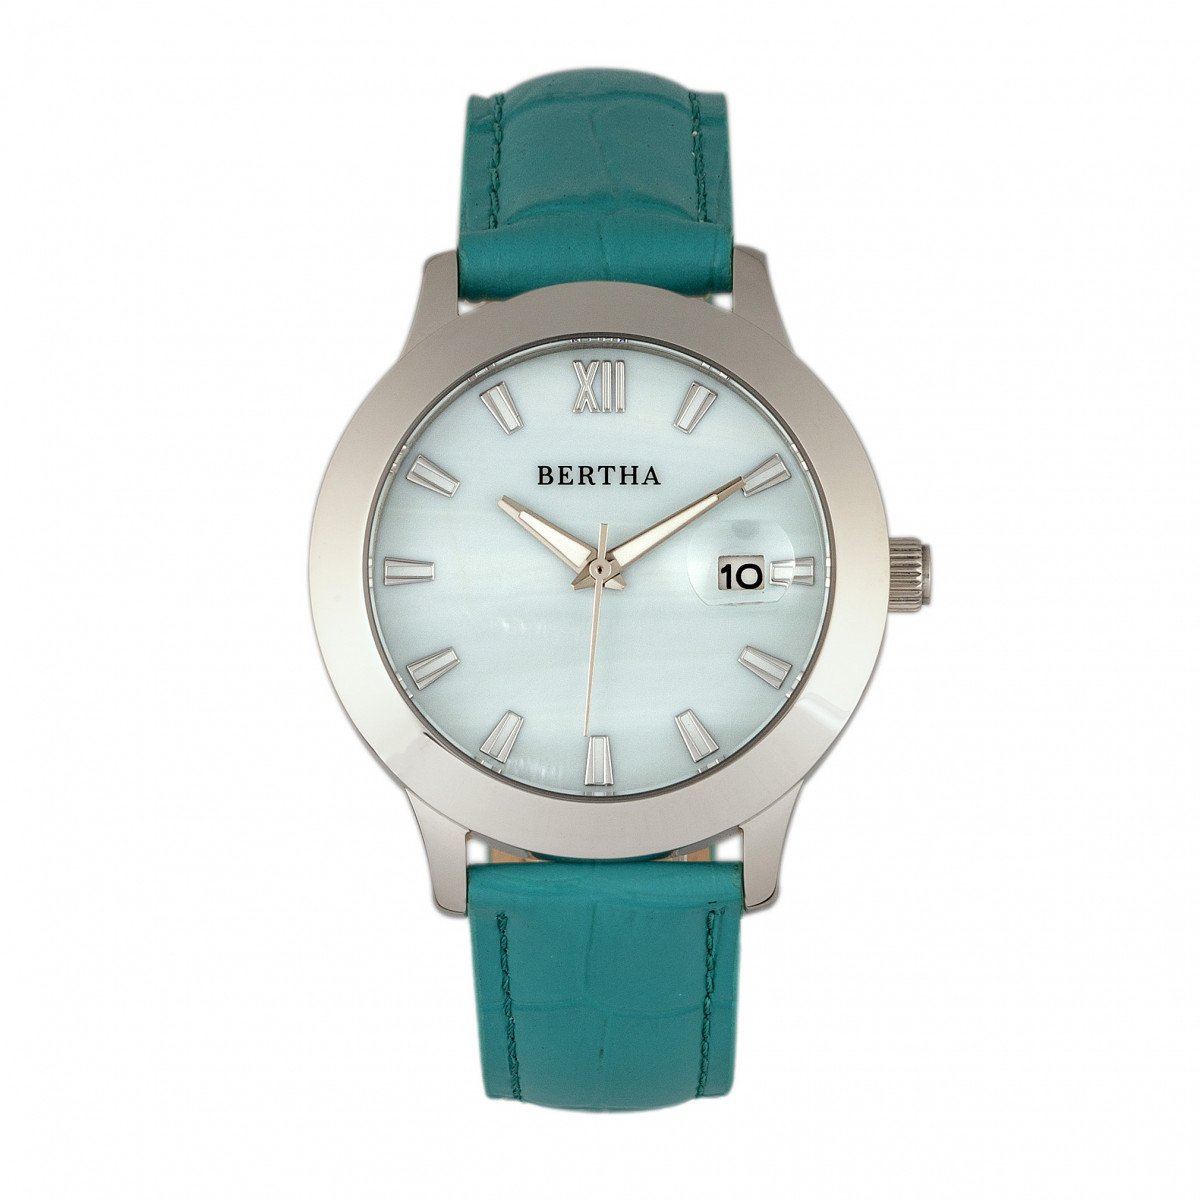 Bertha Eden Mother-Of-Pearl Leather-Band Watch w/Date - Turquoise/Silver - BTHBR6503